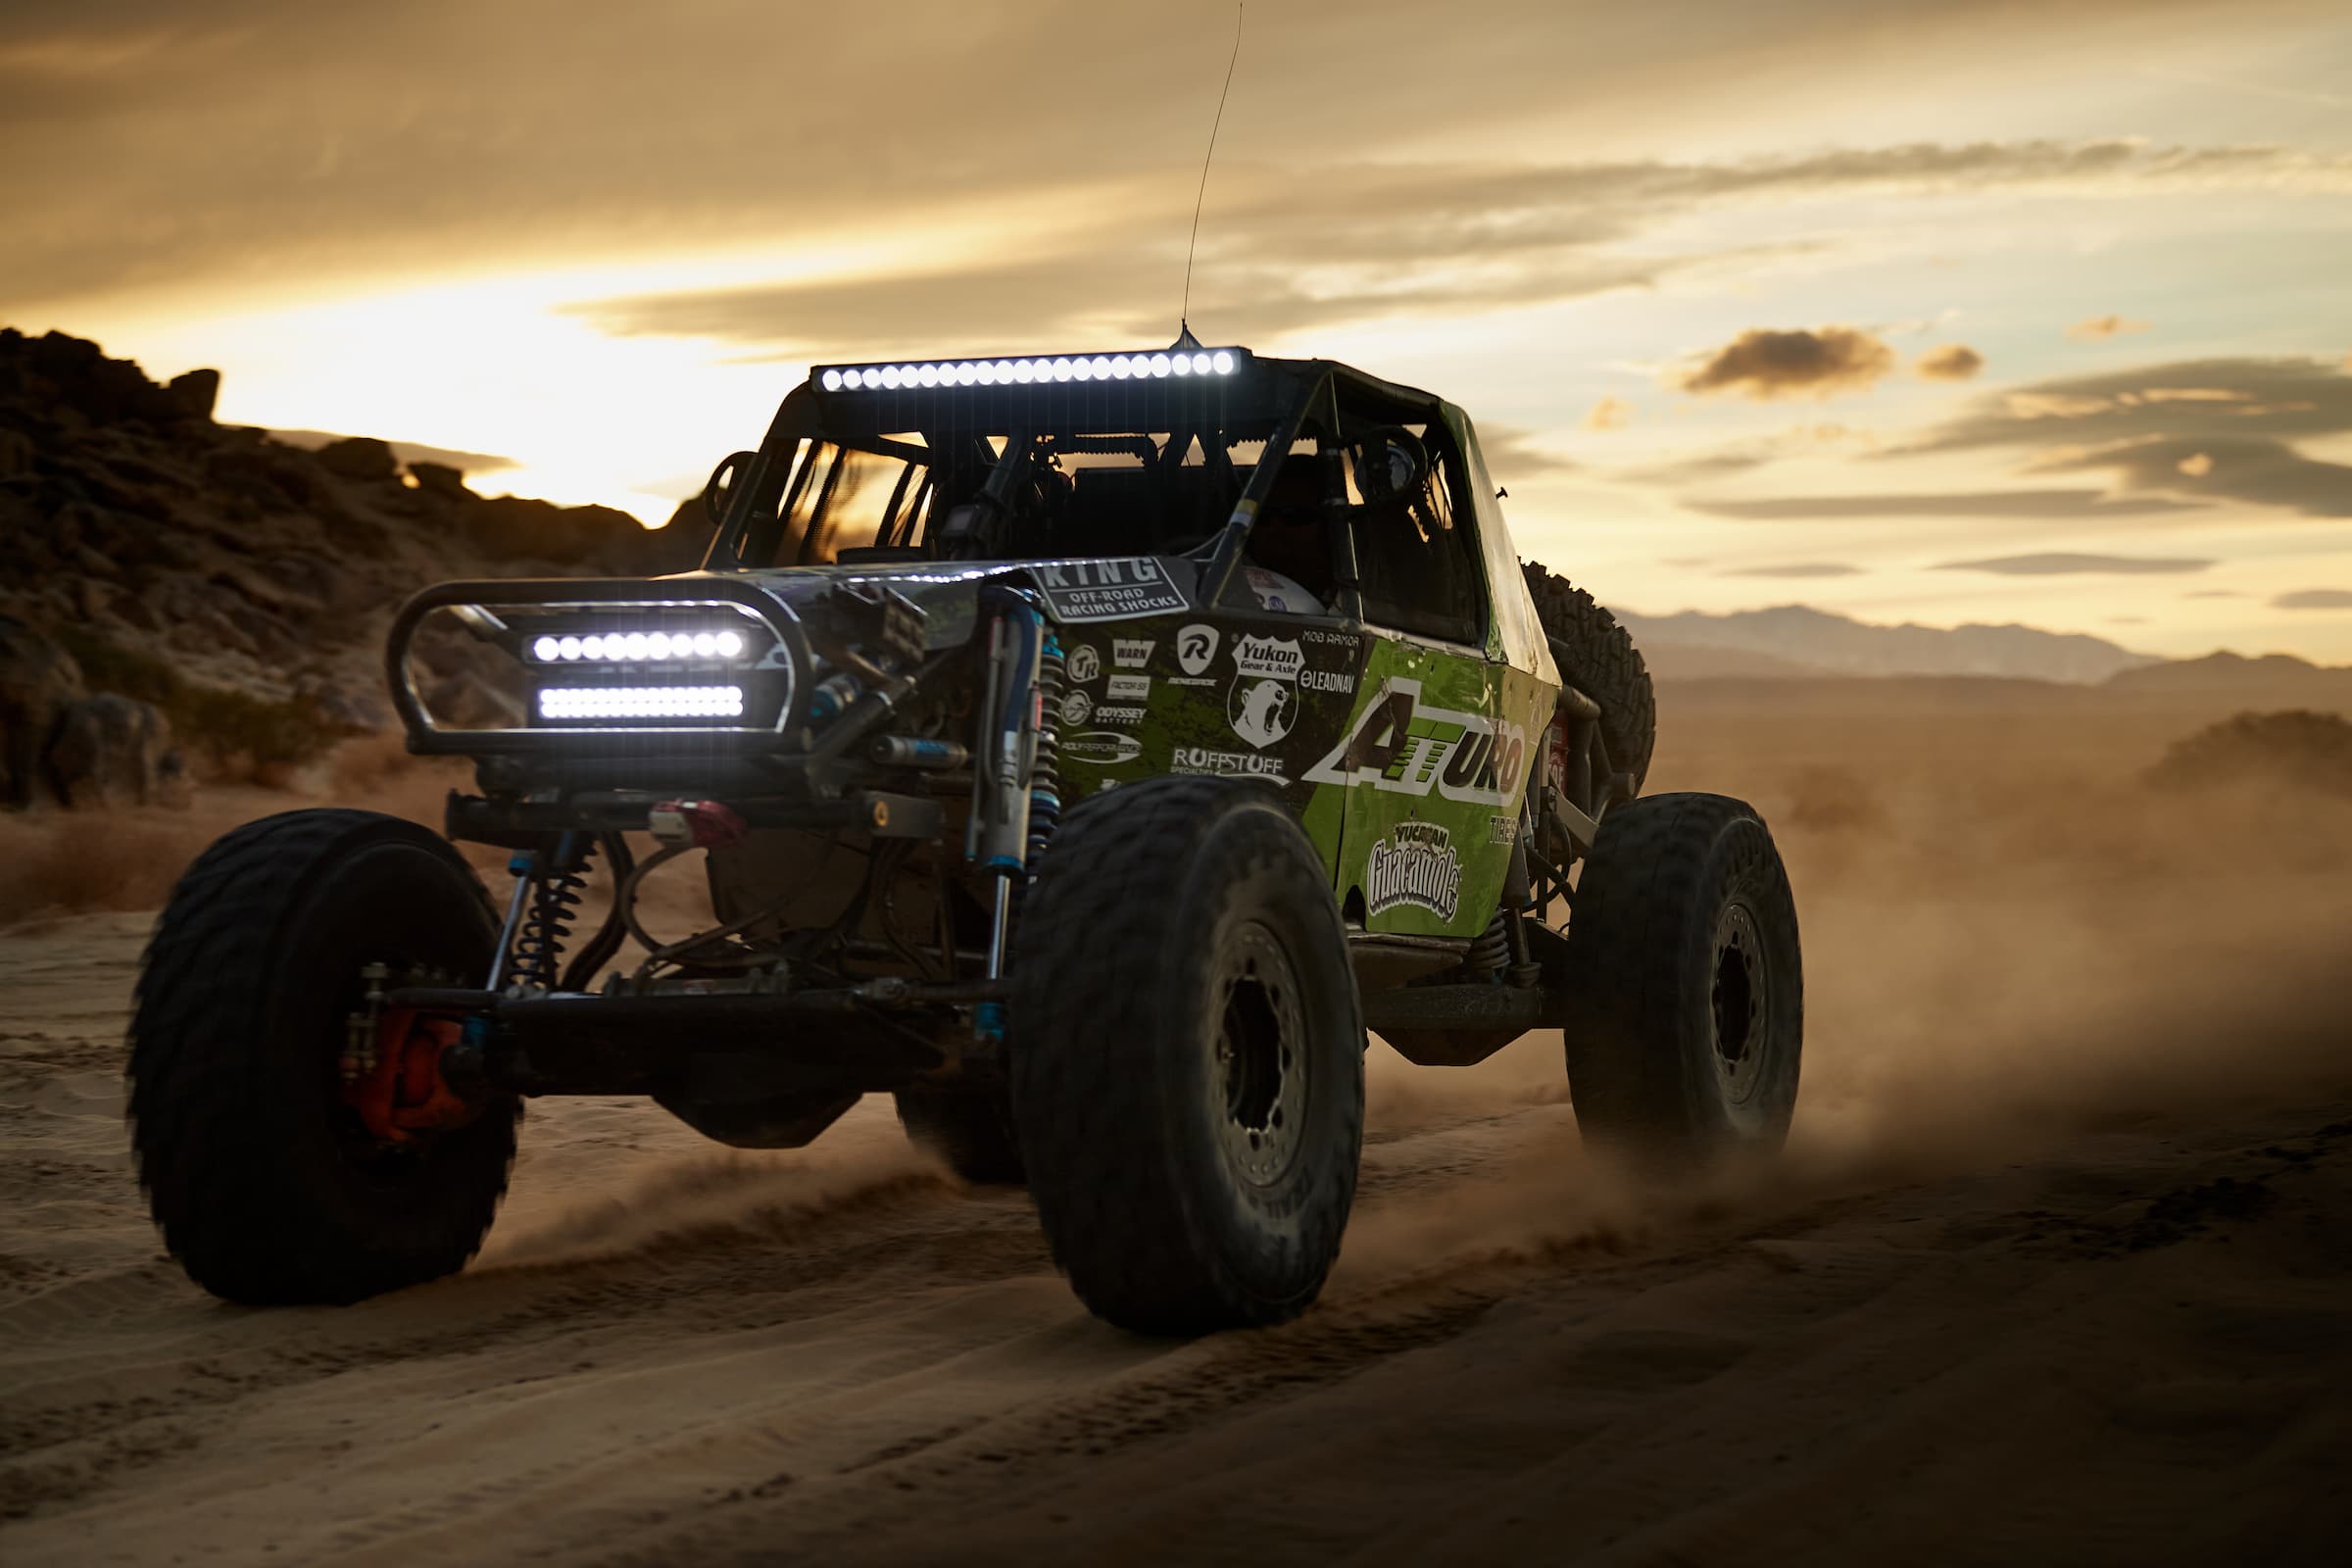 ATTURO TIRE EXPANDS THEIR OFF-ROAD MOTORSPORTS OFFERINGS WITH DEBUT OF NEW ‘GREEN LABEL’ TRAIL BLADE BOSS